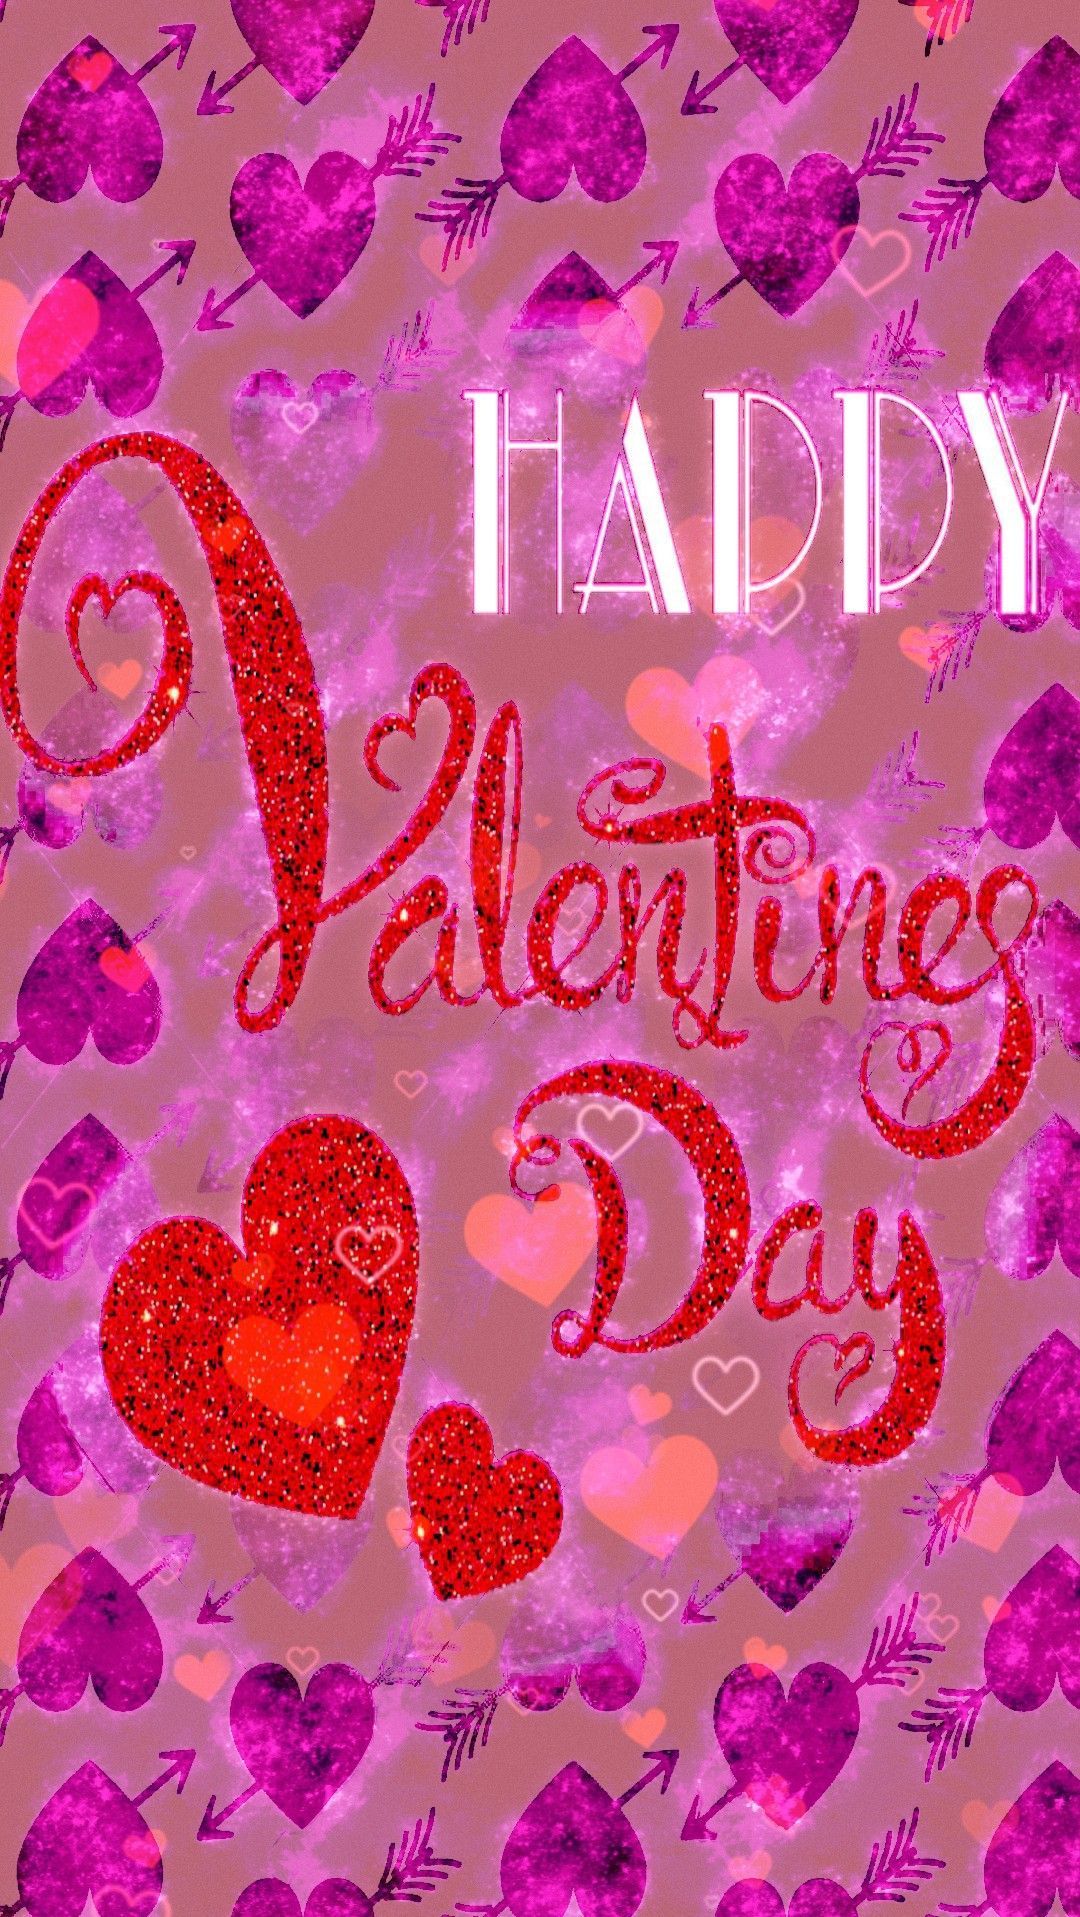 Happy Valentine's Day, made by me #patterns #hearts #love #bemine #cupidhearts #iloveyou #red #gl. Pink chevron wallpaper, Heart iphone wallpaper, Pink valentines